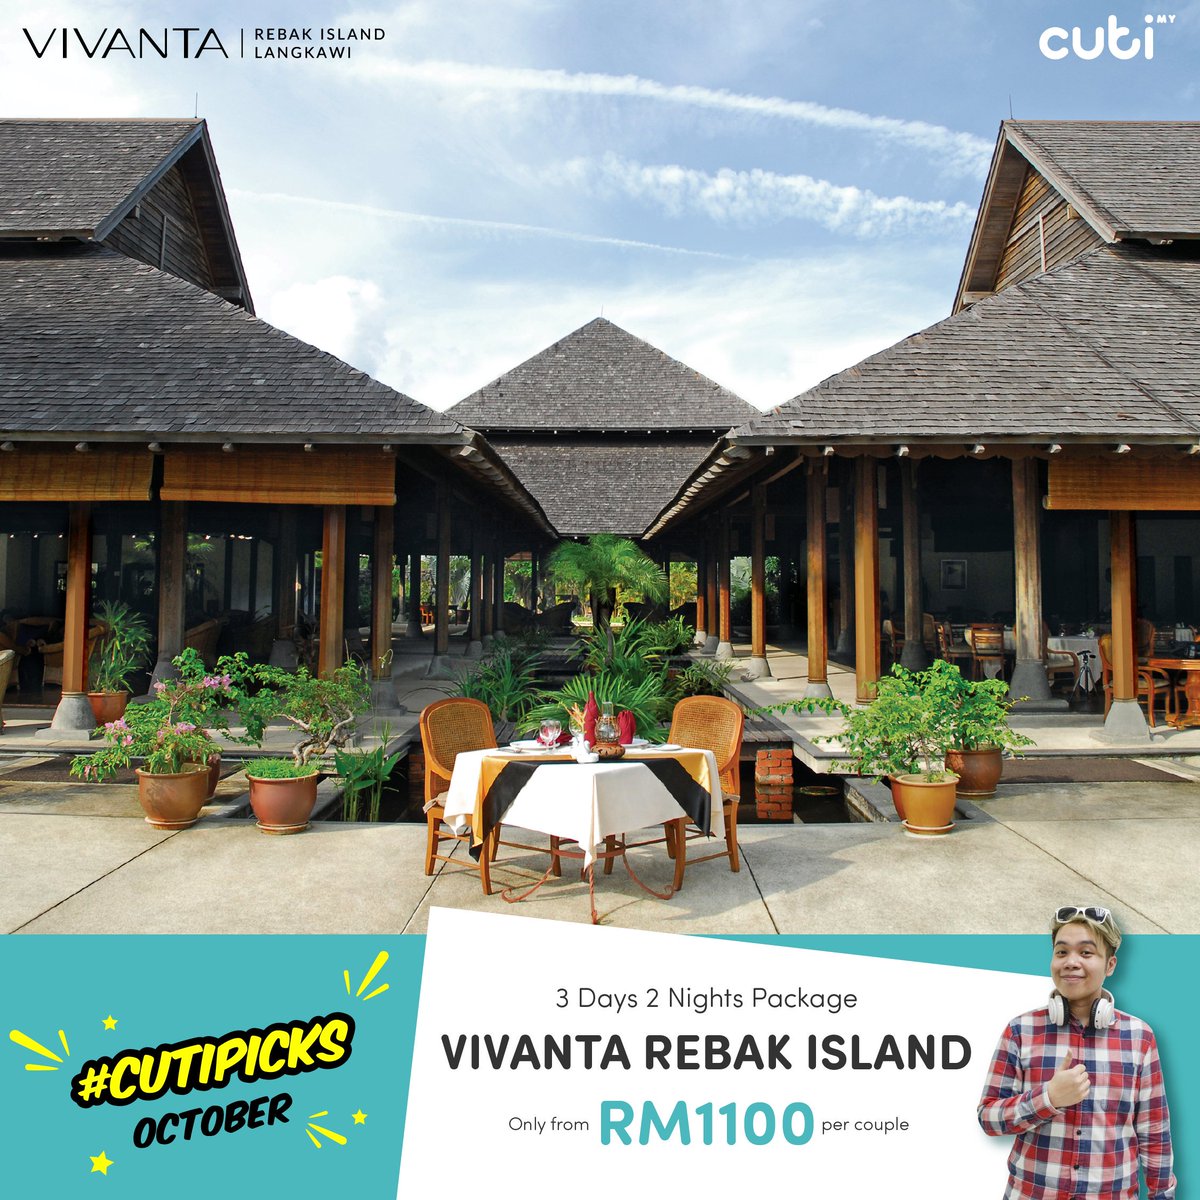 Our #cutipicks of the month, 3 Days 2 Nights Vivanta Resort Private Island for only RM1,100/ couple! 🏝 A very worth package that you for sure don't want to miss.

Package thread.

#cutimy #CutiPicks #vivantarebaklangkawi #VivantaRebakIsland #TracesOfRebak #DiscoverLangkawi